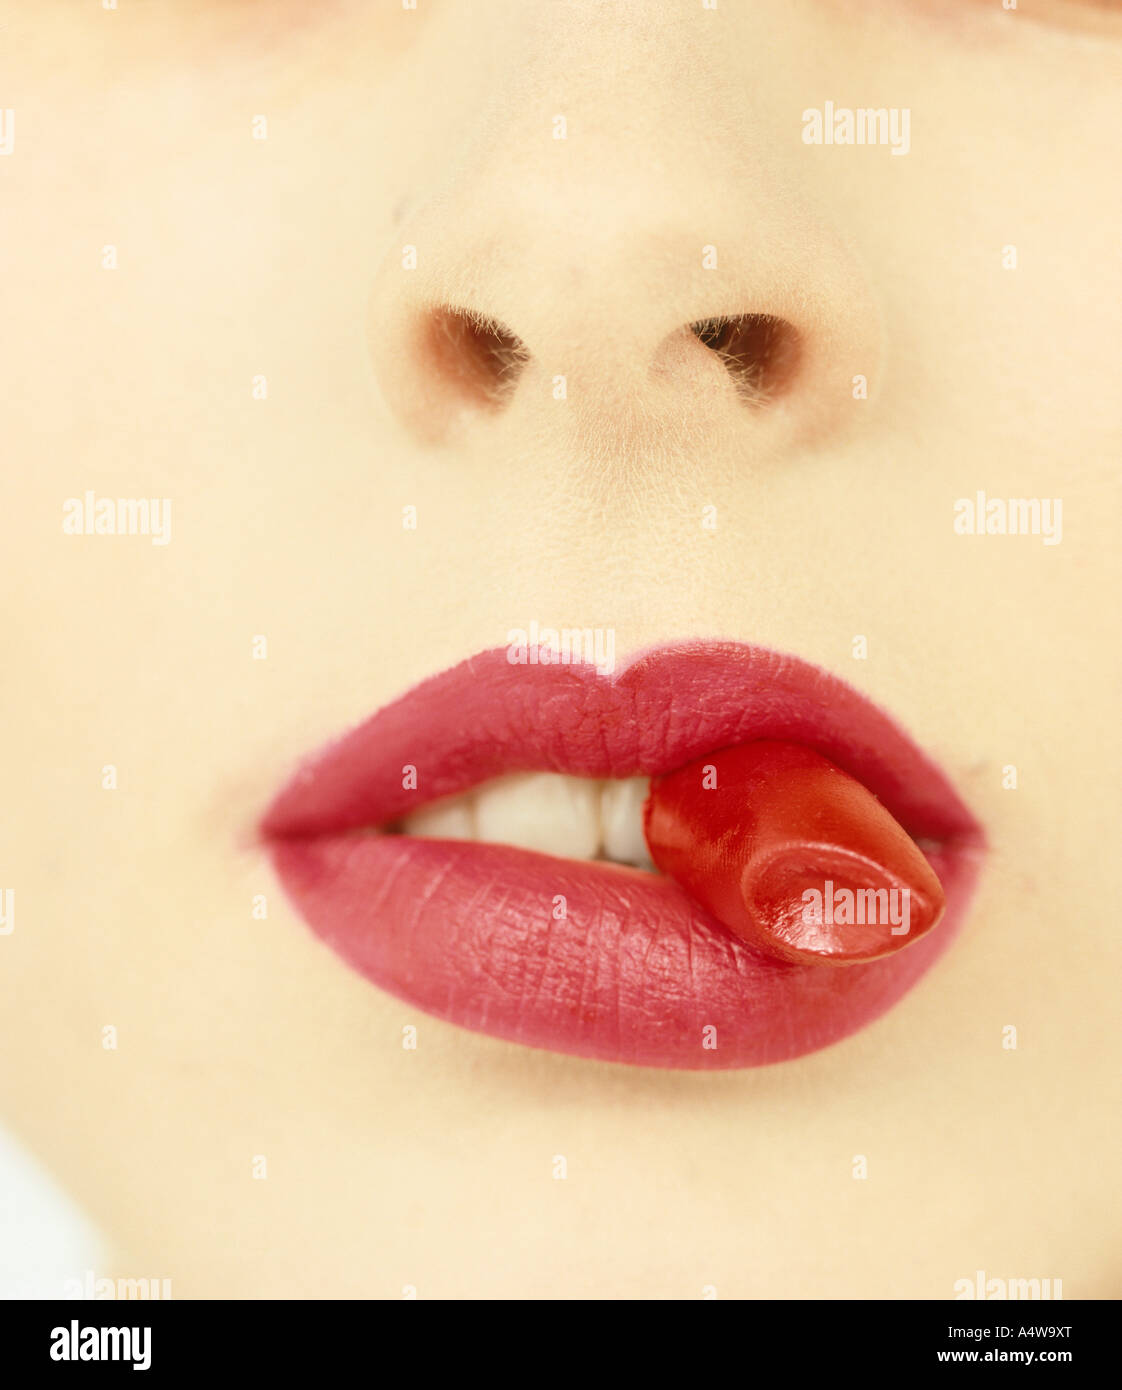 CLOSE-UP OF GIRL'S RED LIPS Stock Photo